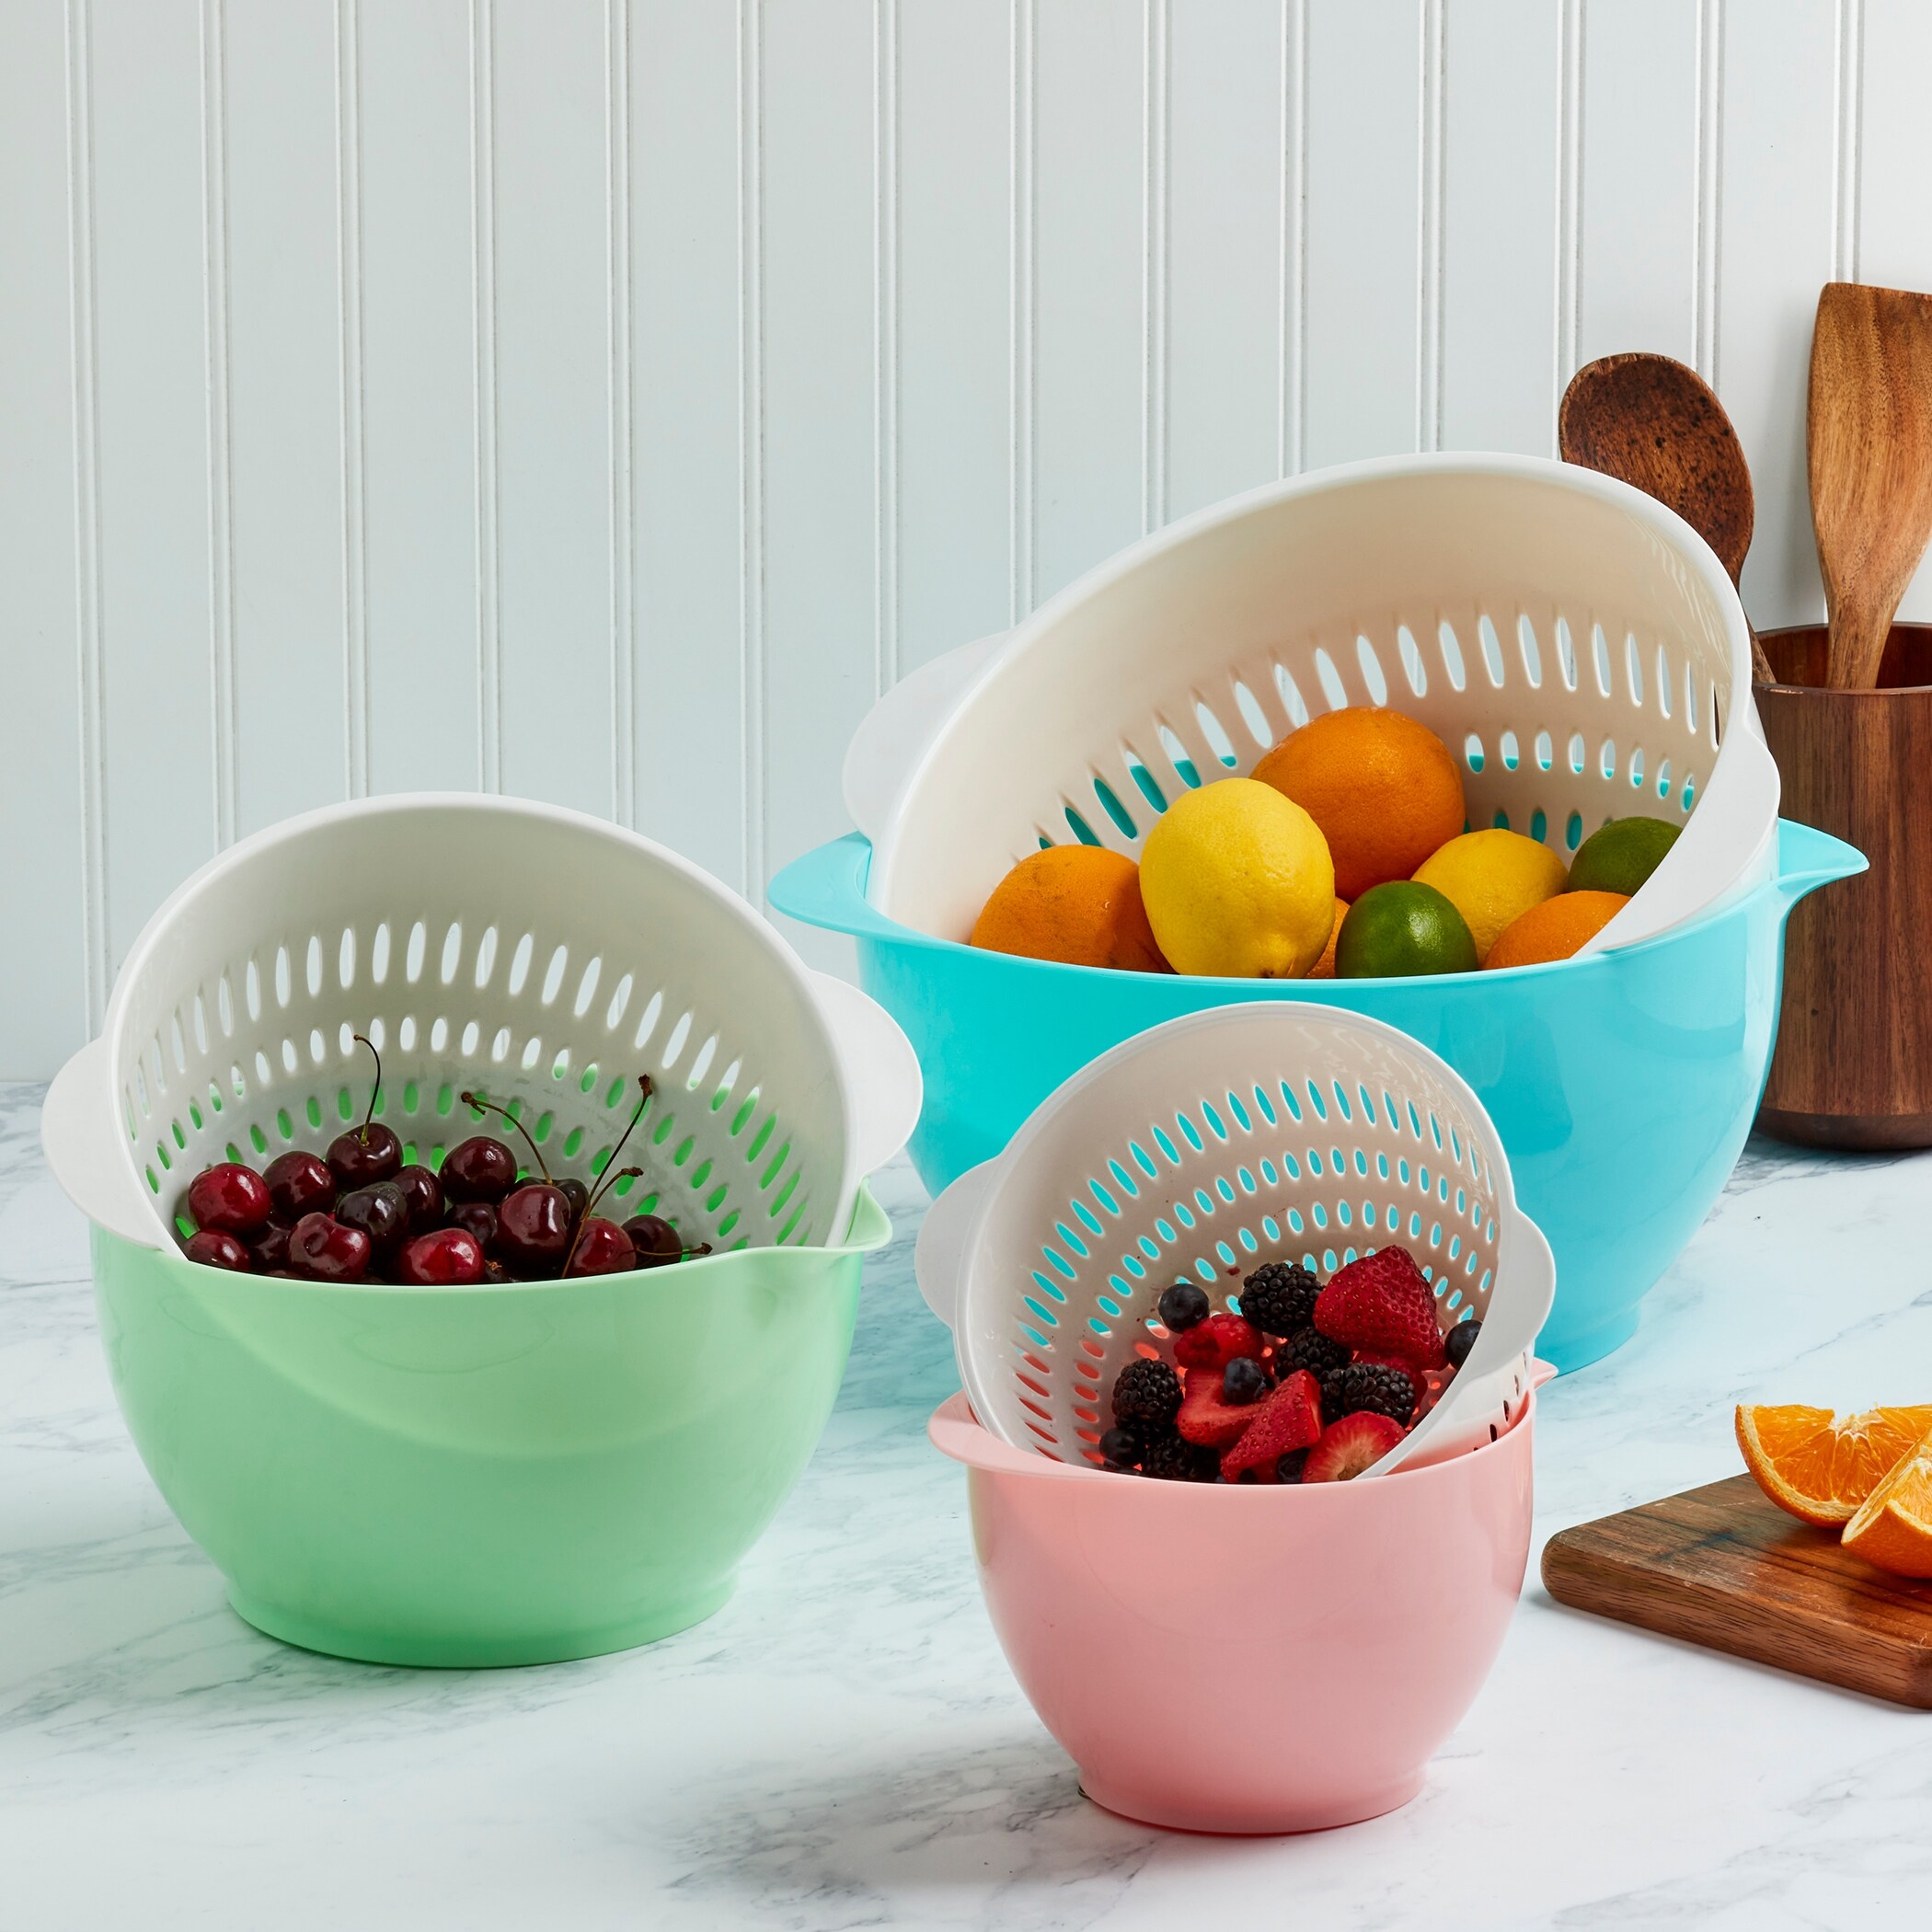 6 Piece Mixing Bowls with Colanders Set, Assorted Colors